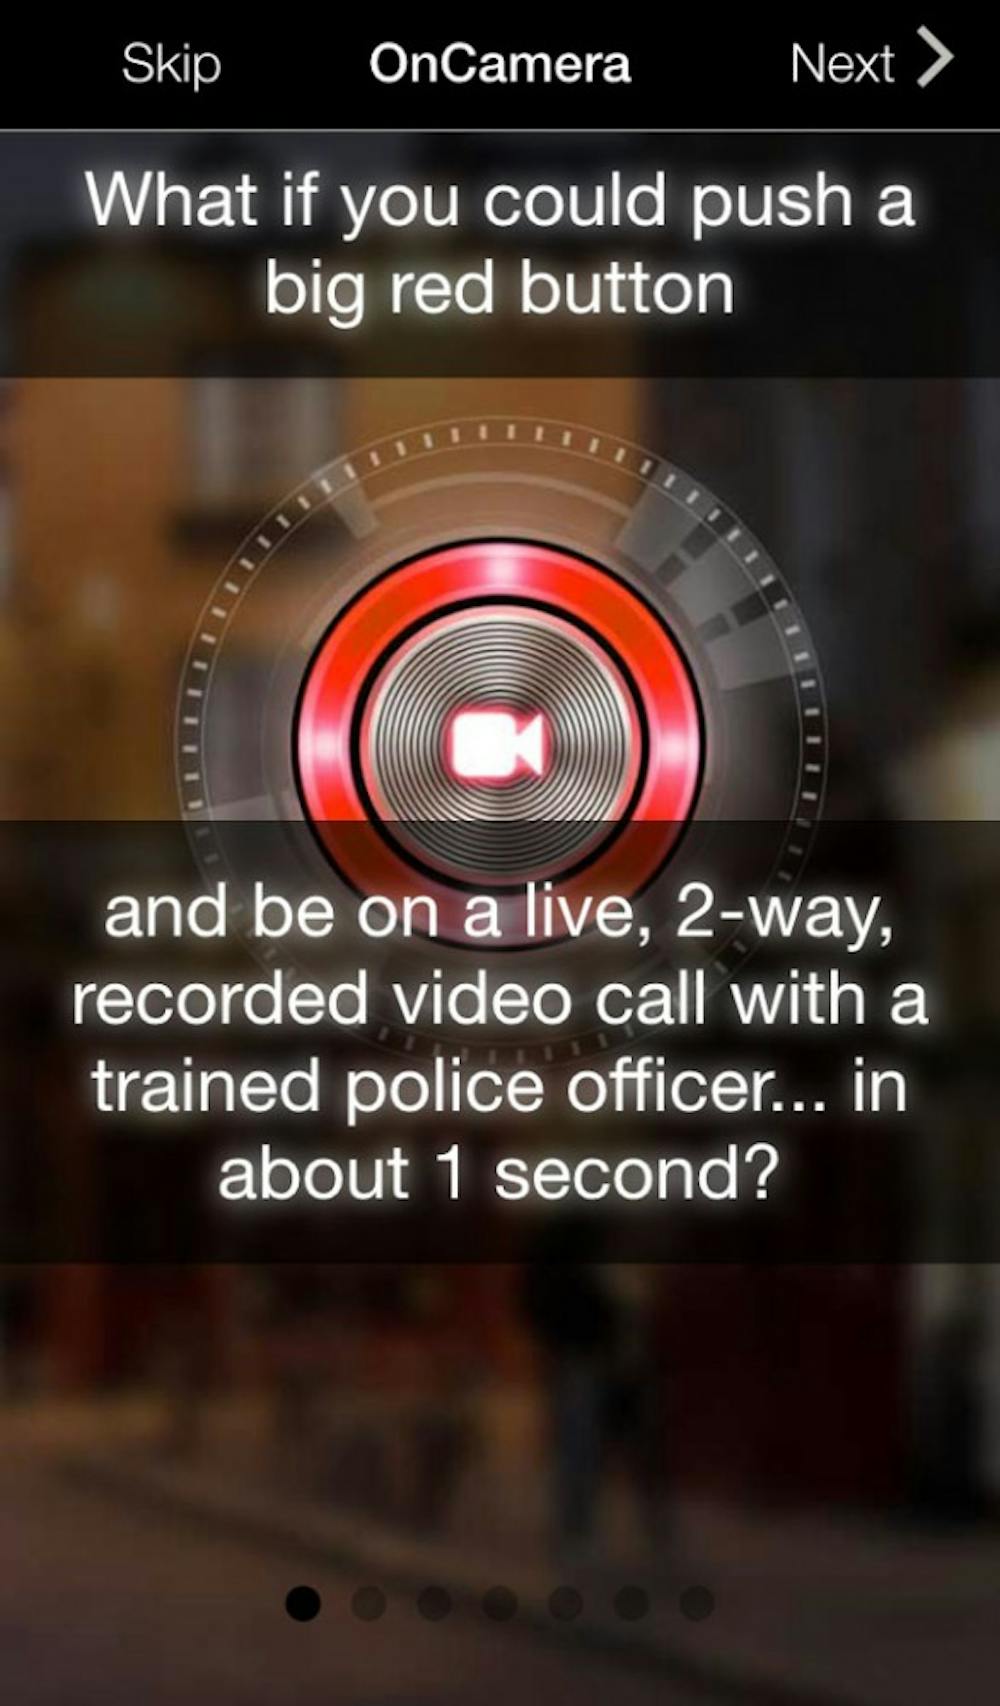 <p>The app OnCamera allows users to record someone committing a violent crime and then report it to the app's monitors. The monitors will then contact local authorities if the situation escalates.&nbsp;<i style="background-color: initial;">PHOTO COURTESY OF ONCAMERA</i></p>